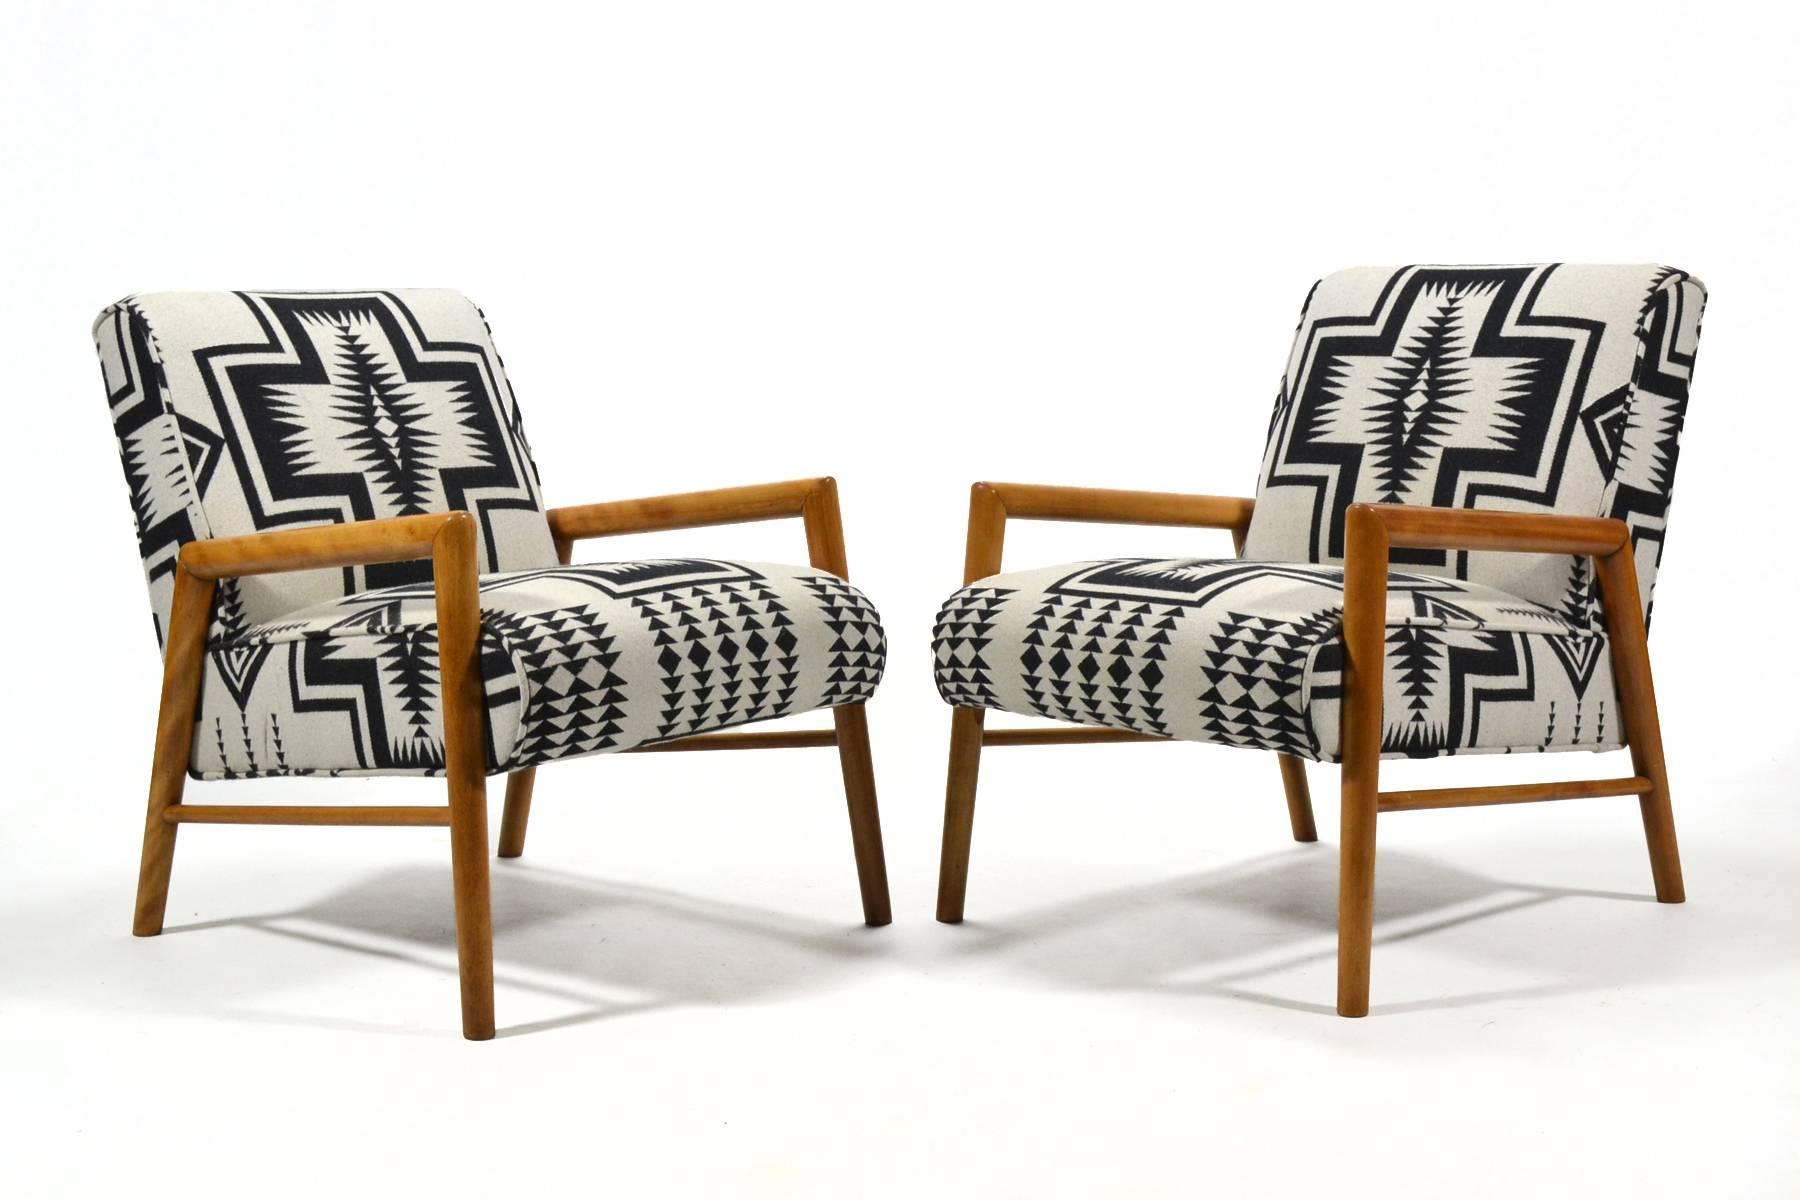 This beautiful pair of easy chairs by Leslie Diamond have open-arm frames of hard rock maple which support seats upholstered in Pendelton 